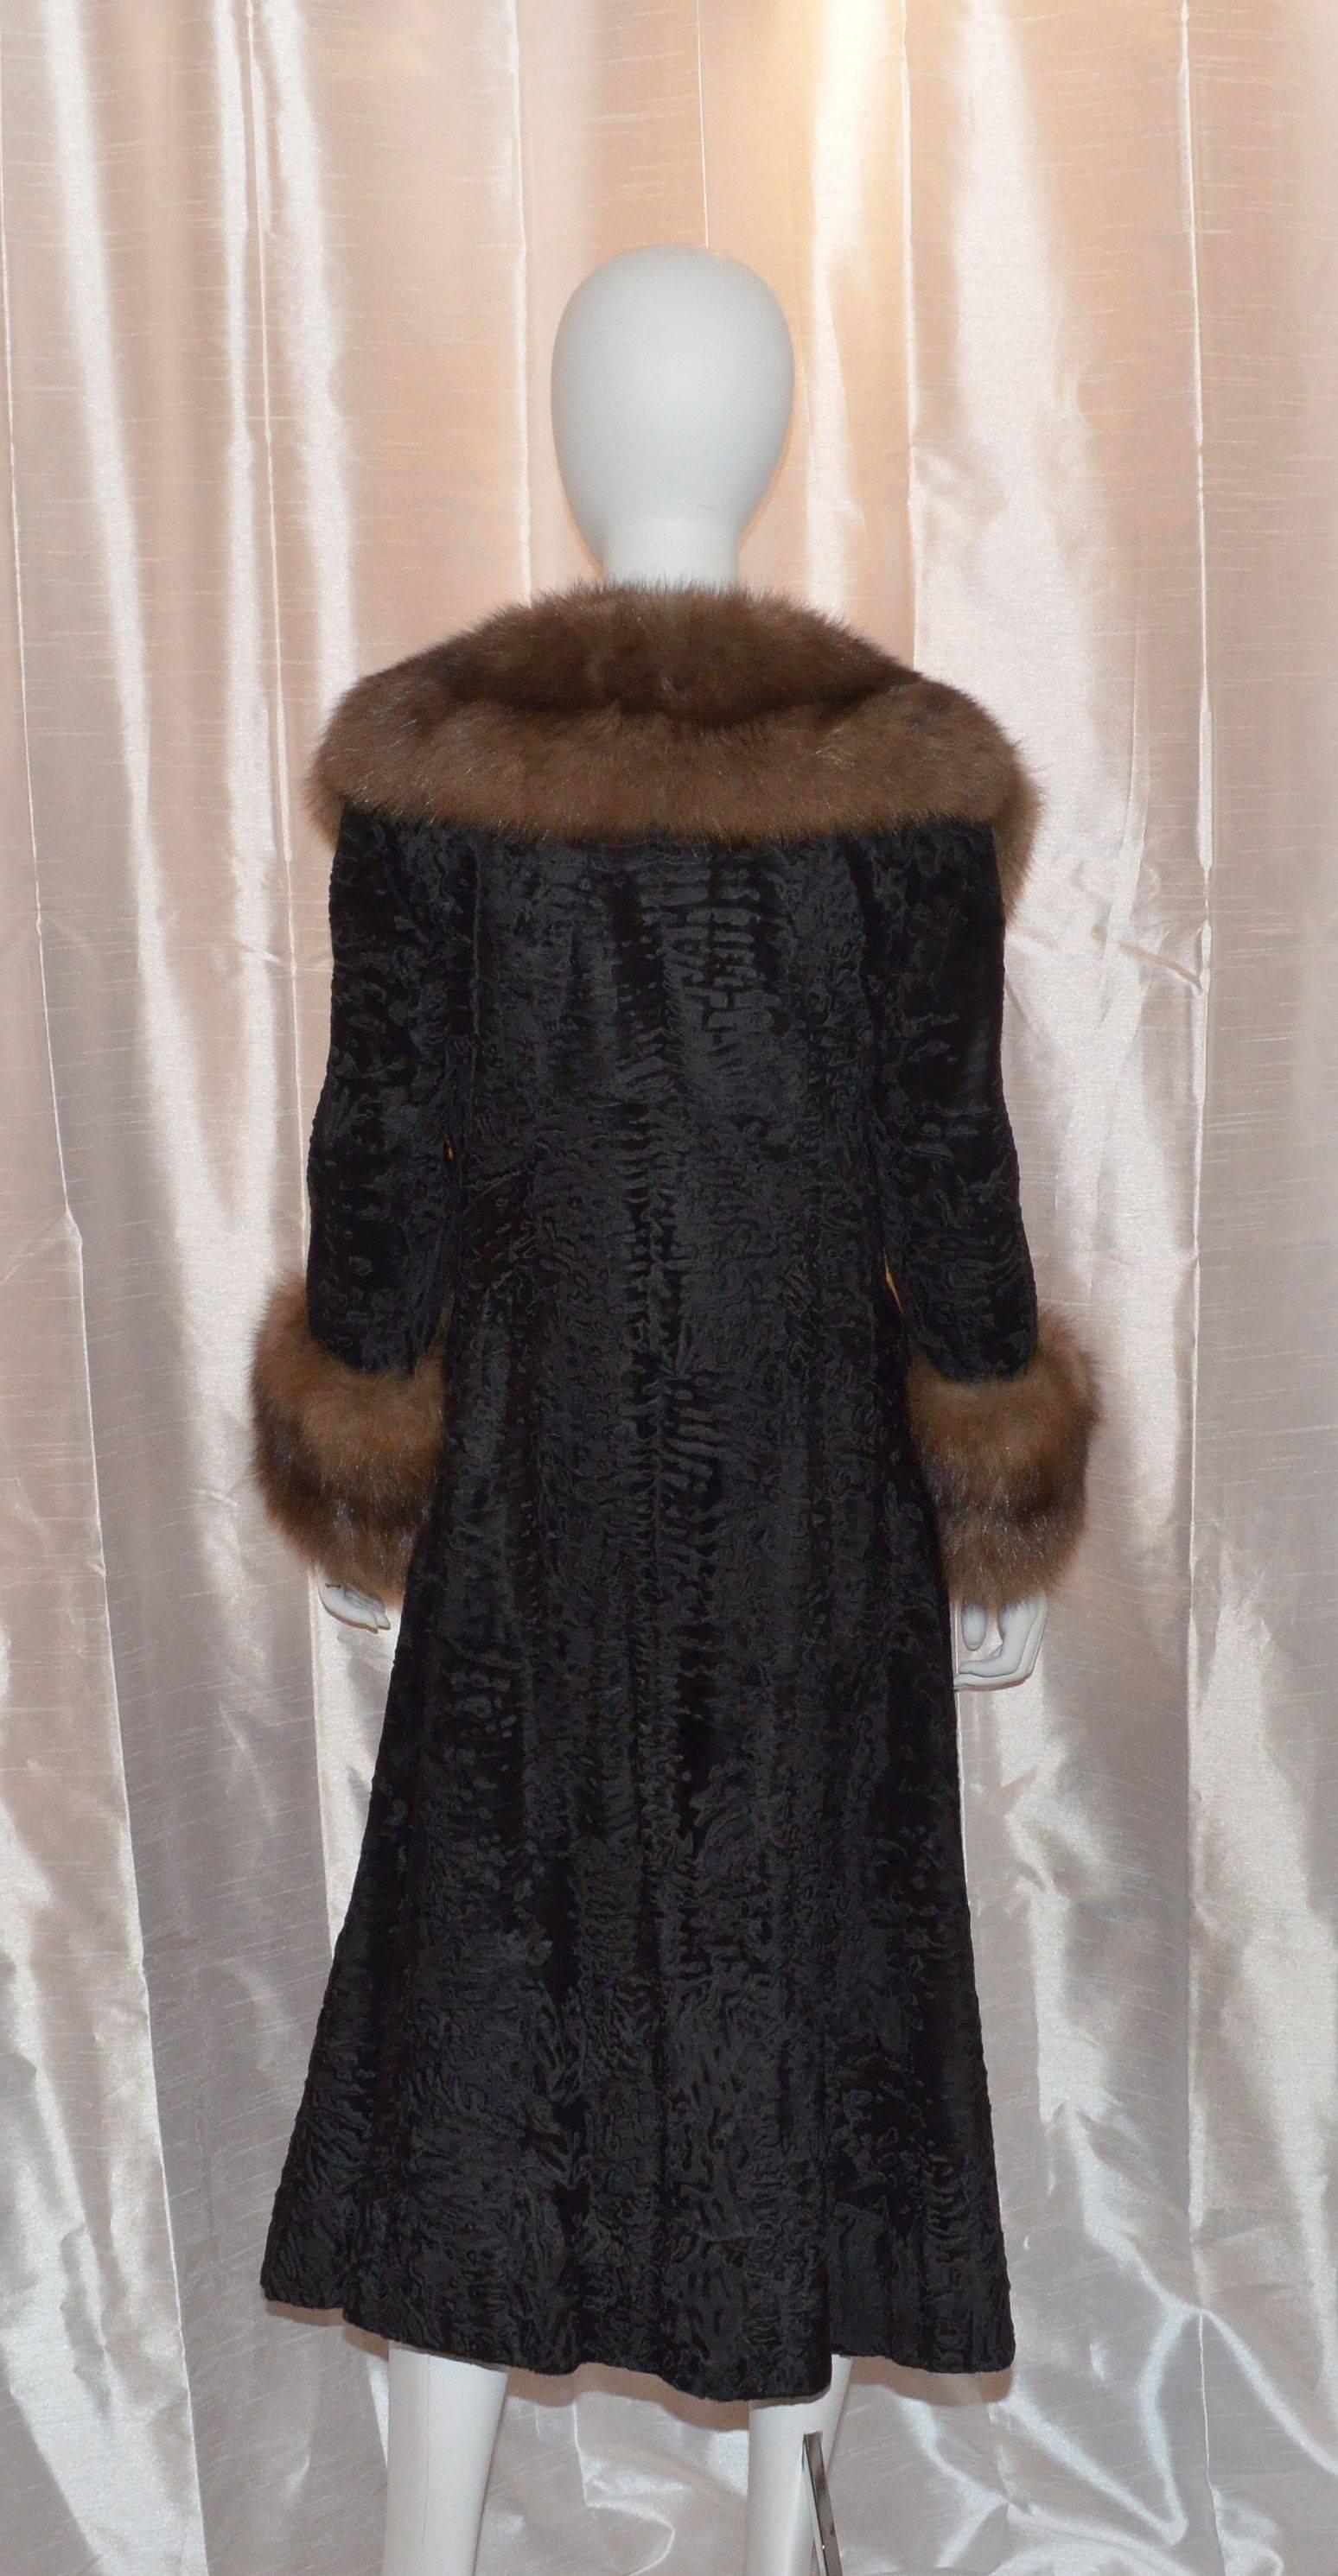 Gorgeous Christian Dior broadtail coat with a Sable fur collar and cuffs, two pockets at the hips, fully lined. Hook-and-eye closure at the front center. Excellent condition.

Measurements:
Bust - 36''
Waist - 35''
Sleeve Length - 23''
Length - 45''